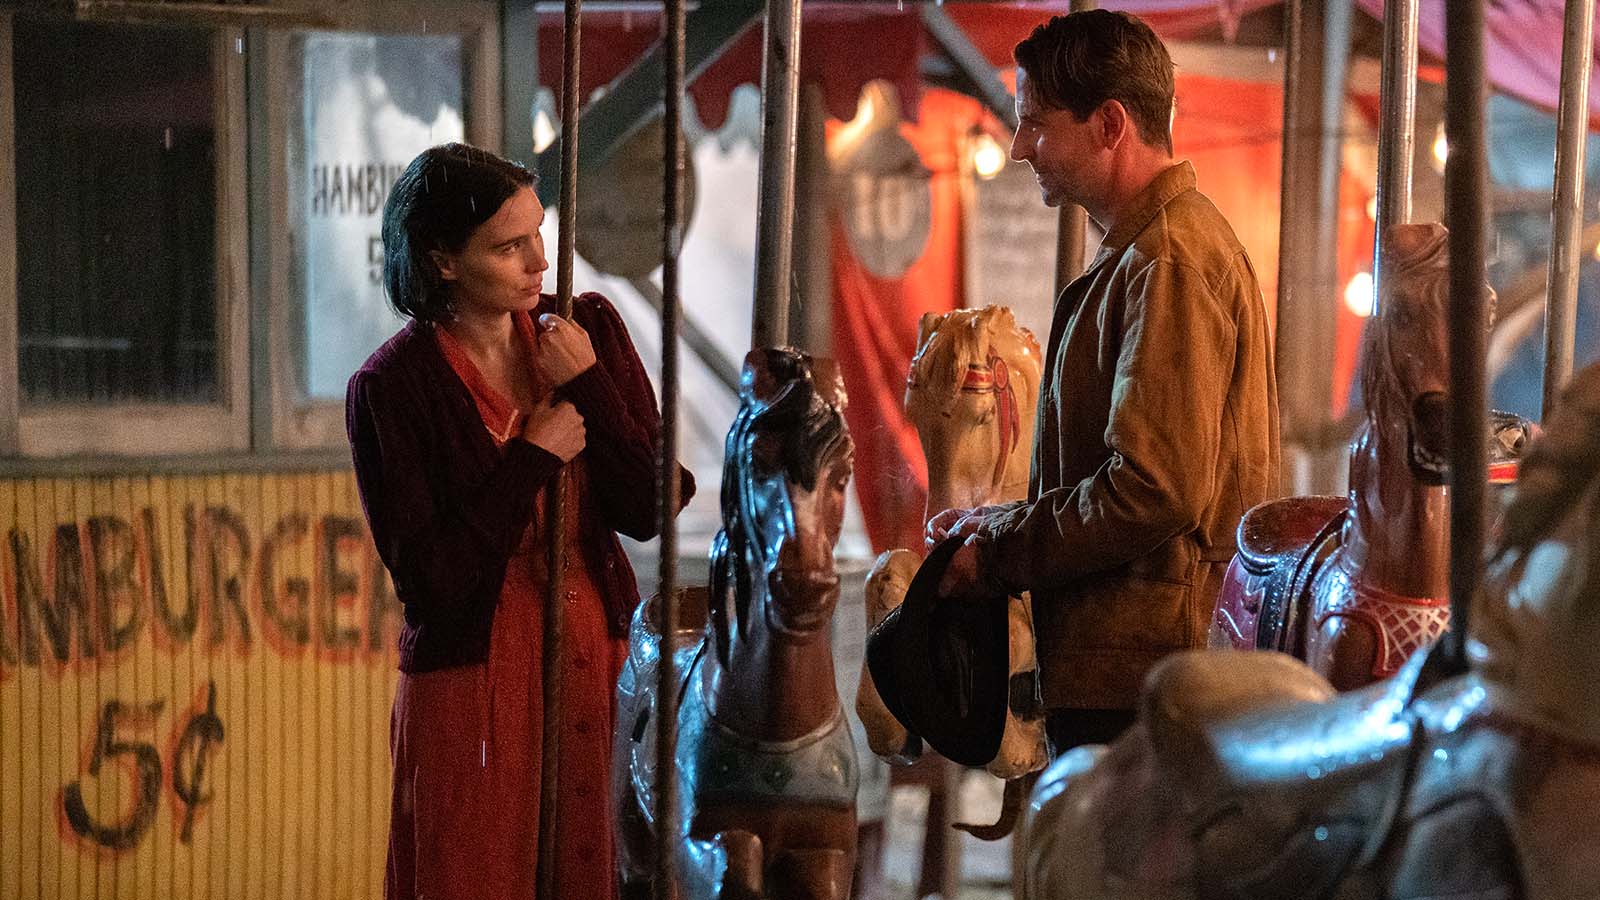 Molly and Stanton on the merry-go-round in Nightmare Alley. Image © Searchlight Pictures